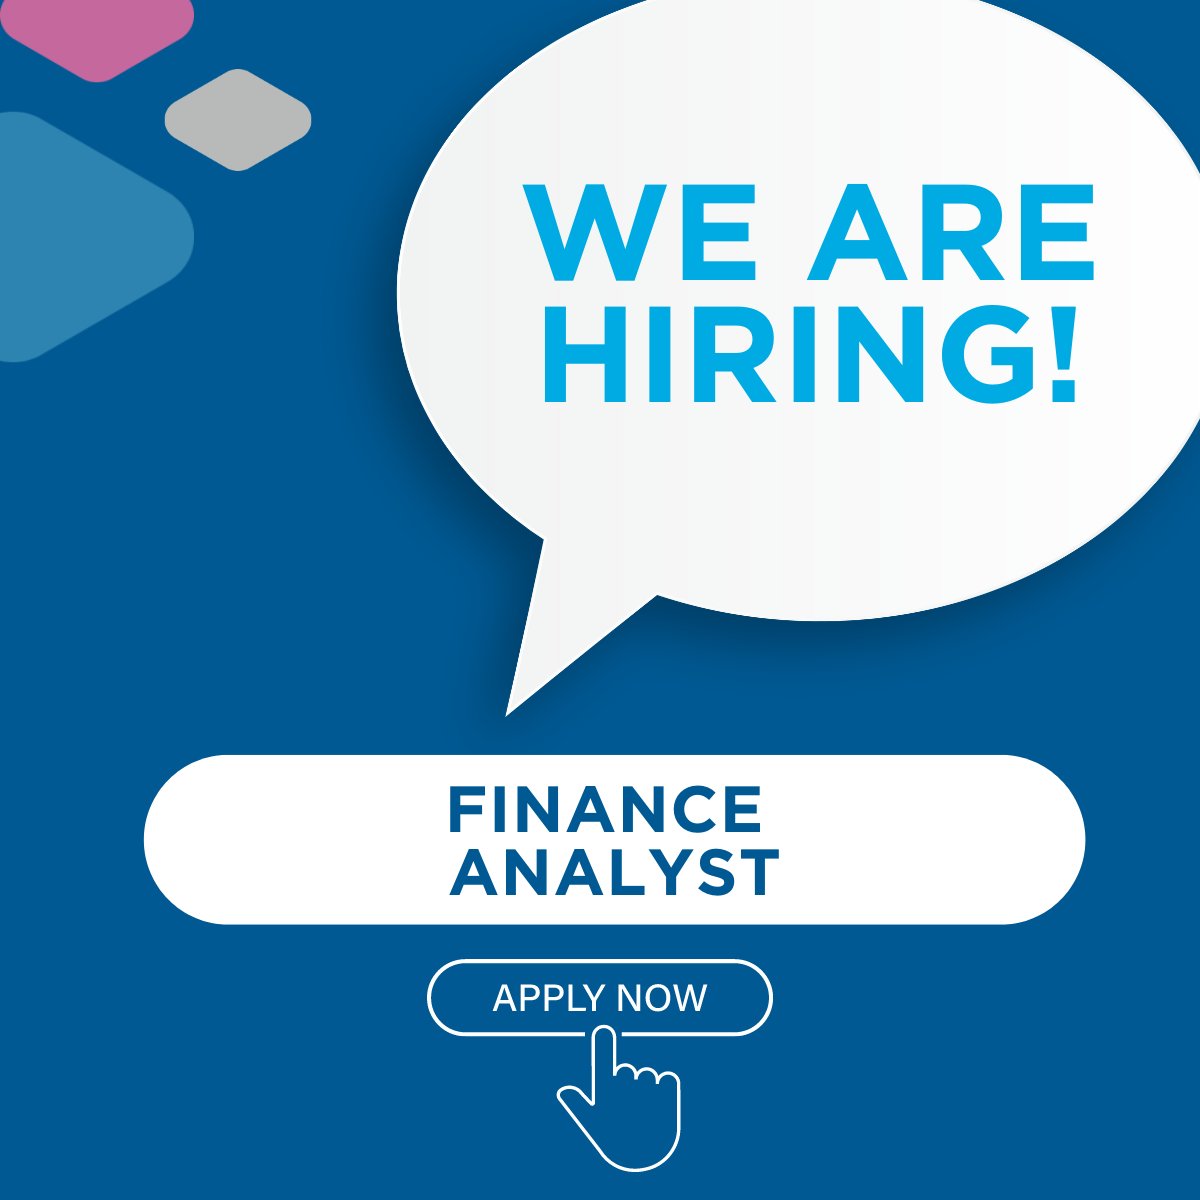 Calling Finance Analysts - come and join our team! 📍 Based in our Gloucester office with hybrid working. Find out more about this exciting opportunity here: vanguardhealthcare.co.uk/about/careers/…